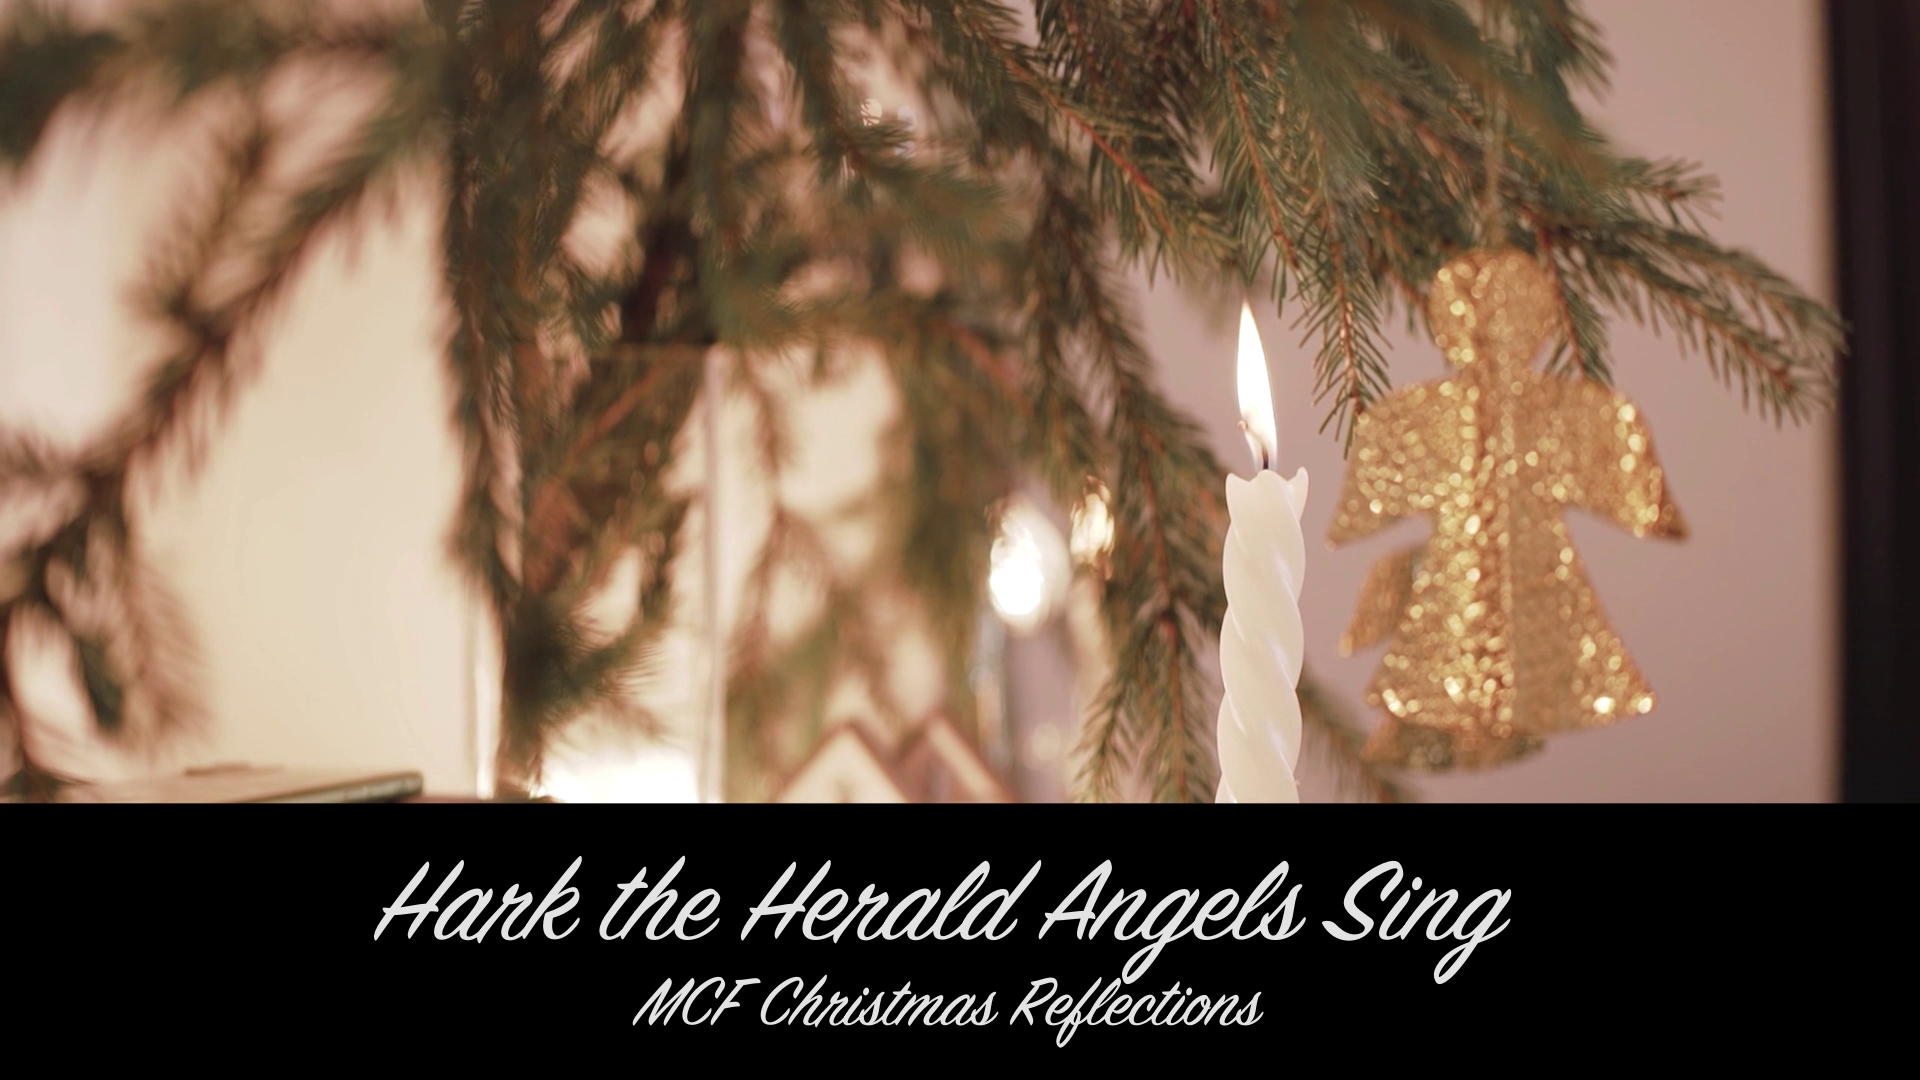 Nick Lugg – Hark the Herald Angels sing